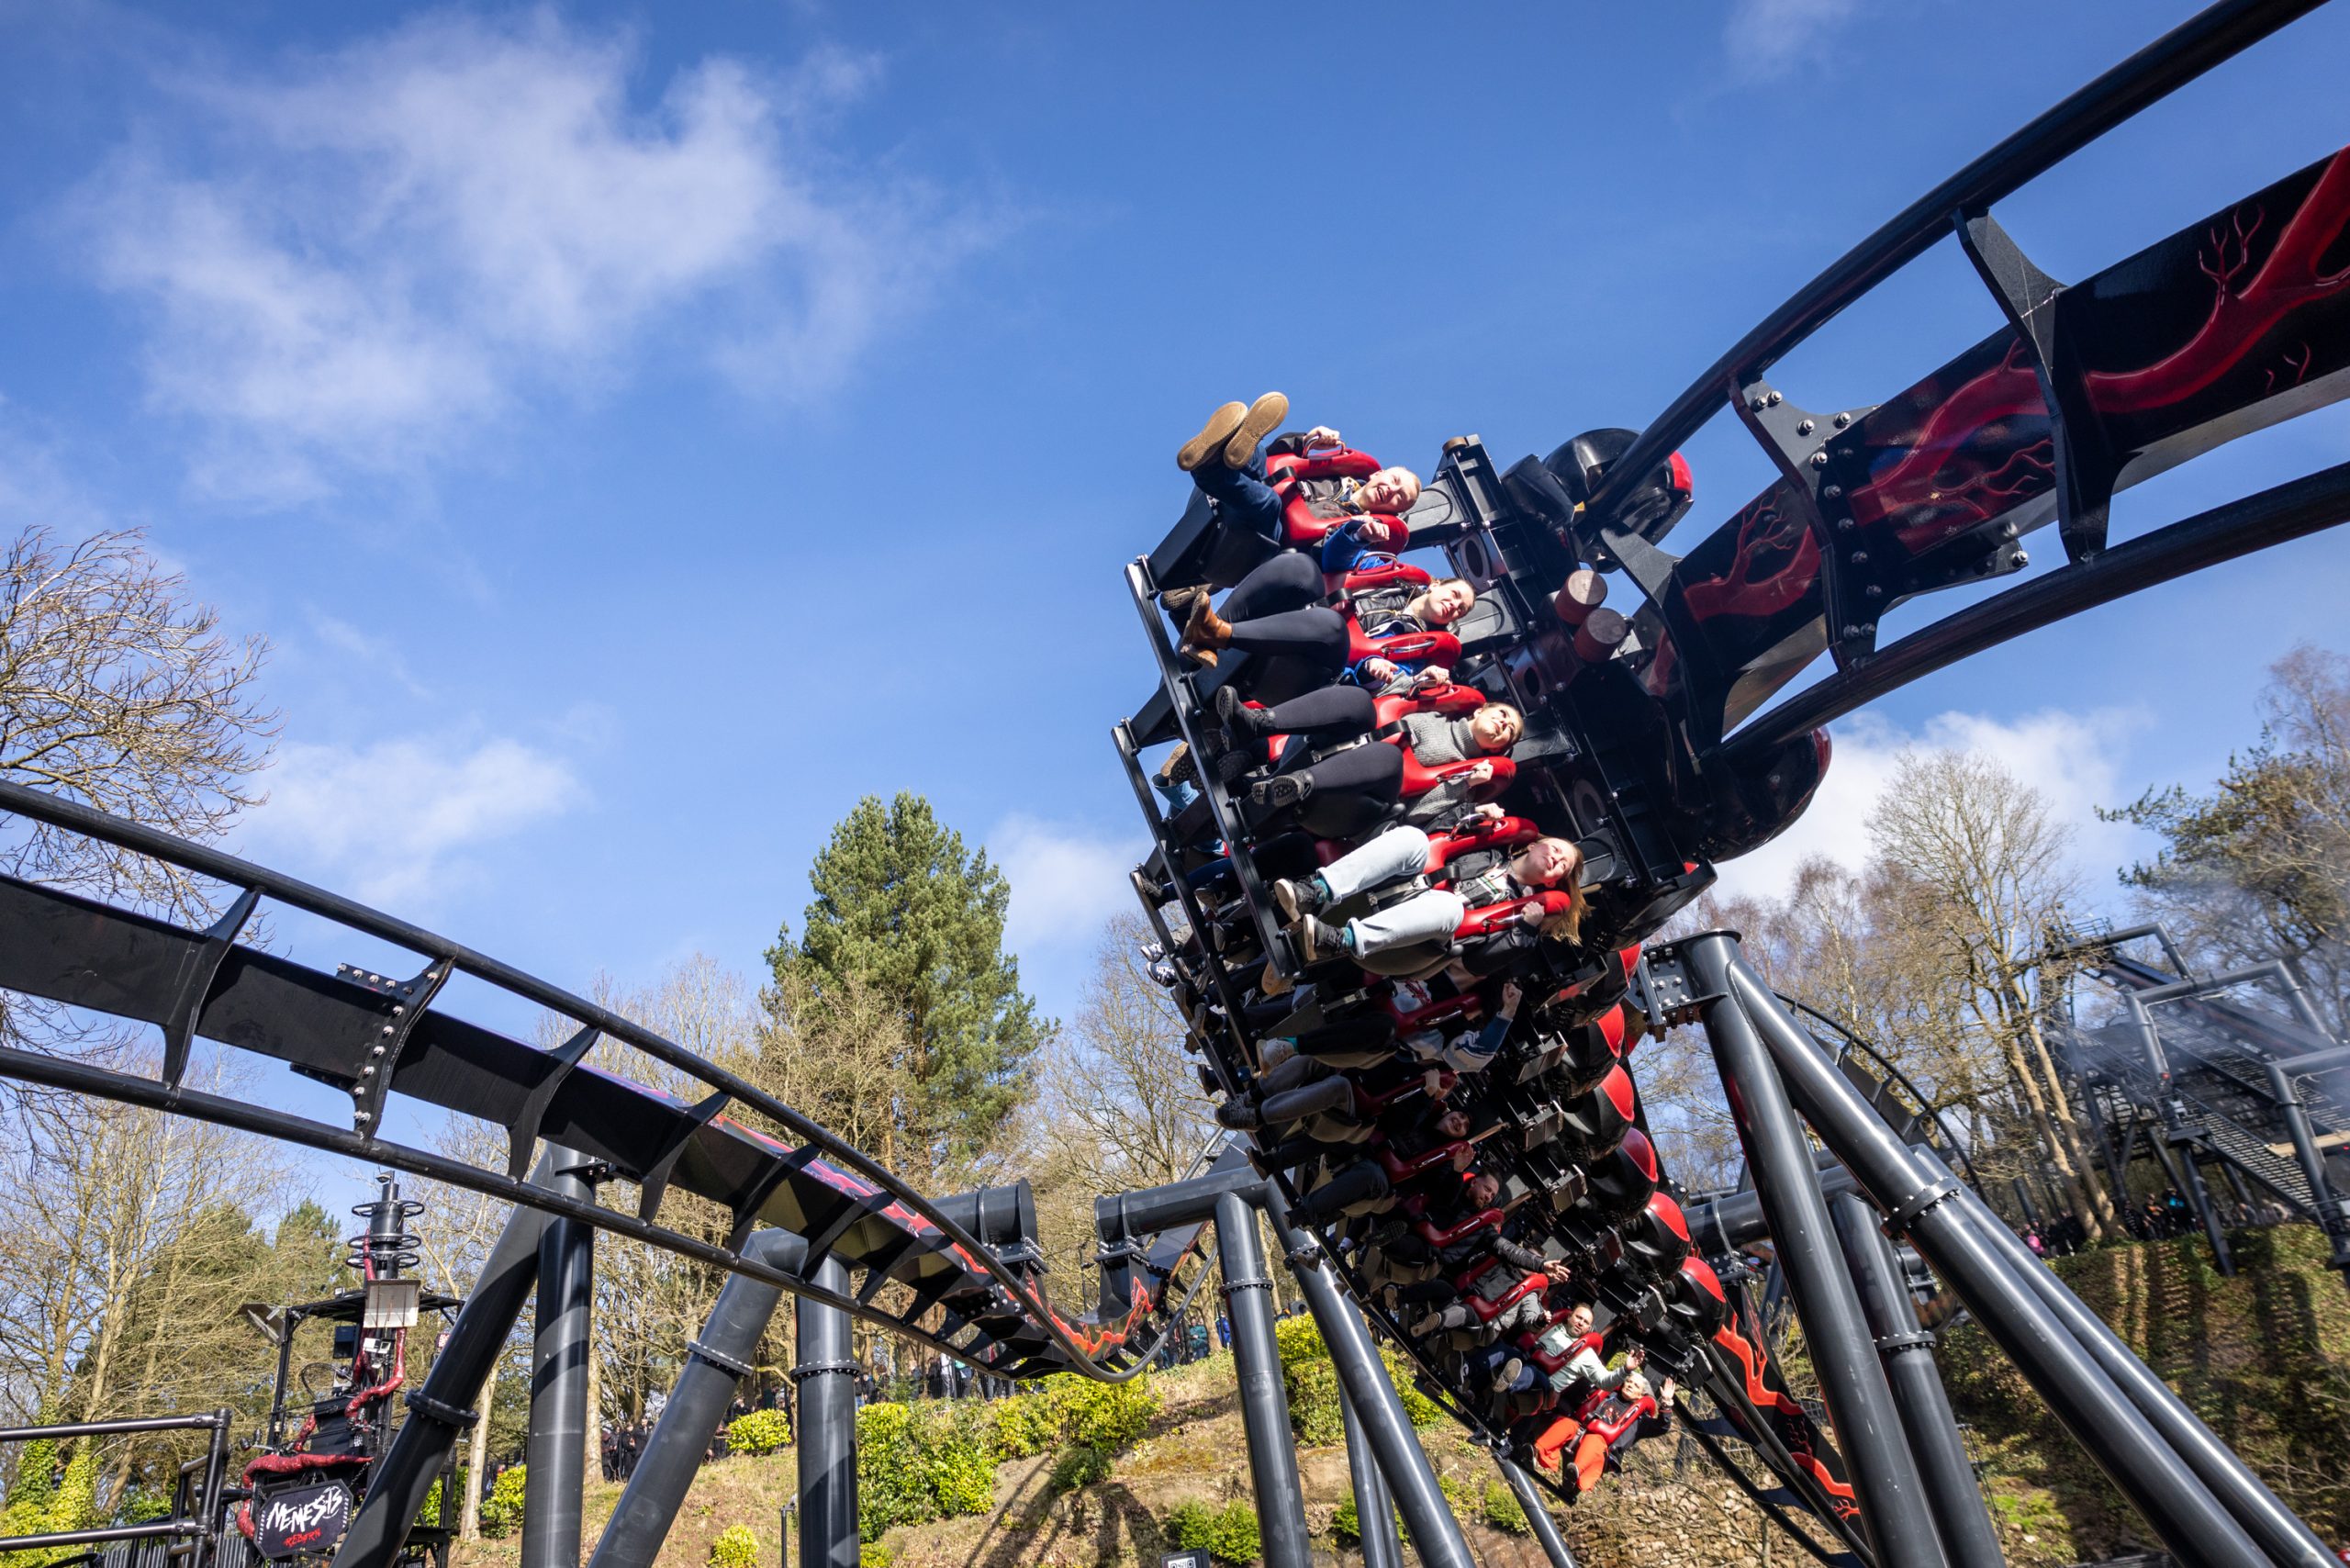 I tried out the new Nemesis Reborn rollercoaster at Alton Towers – here’s the best seat to choose